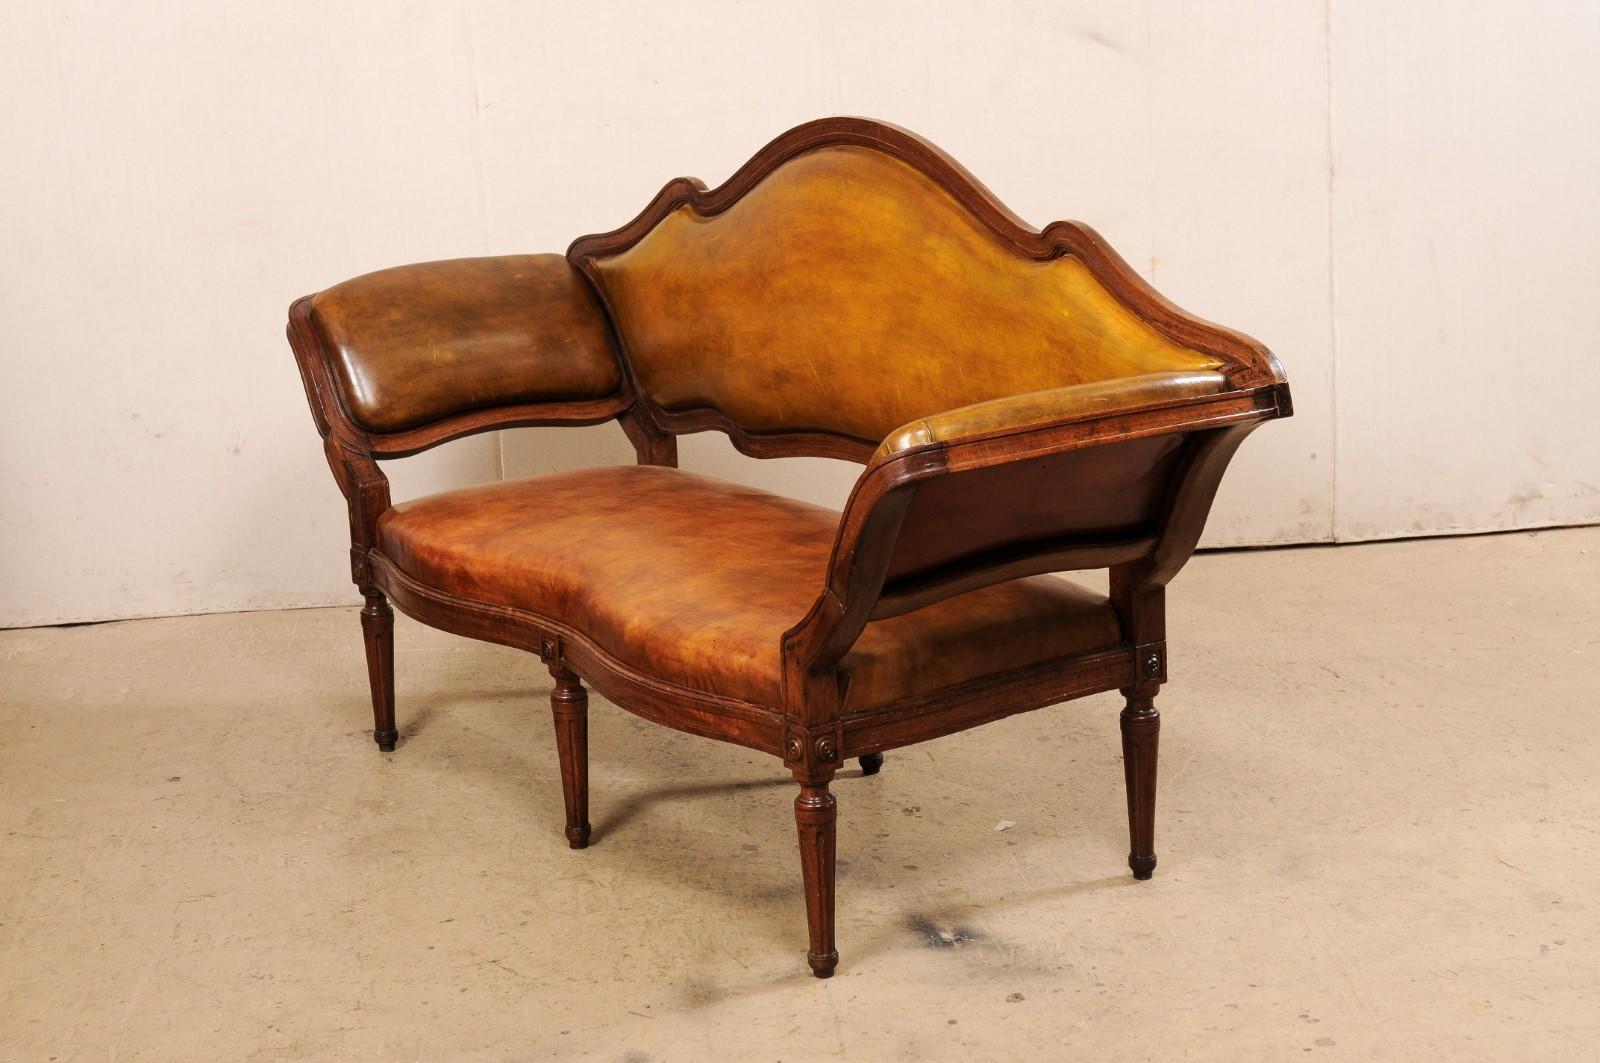 Italian Venetian Leather Upholstered & Carved Wood Settee Sofa, 19th Century For Sale 7